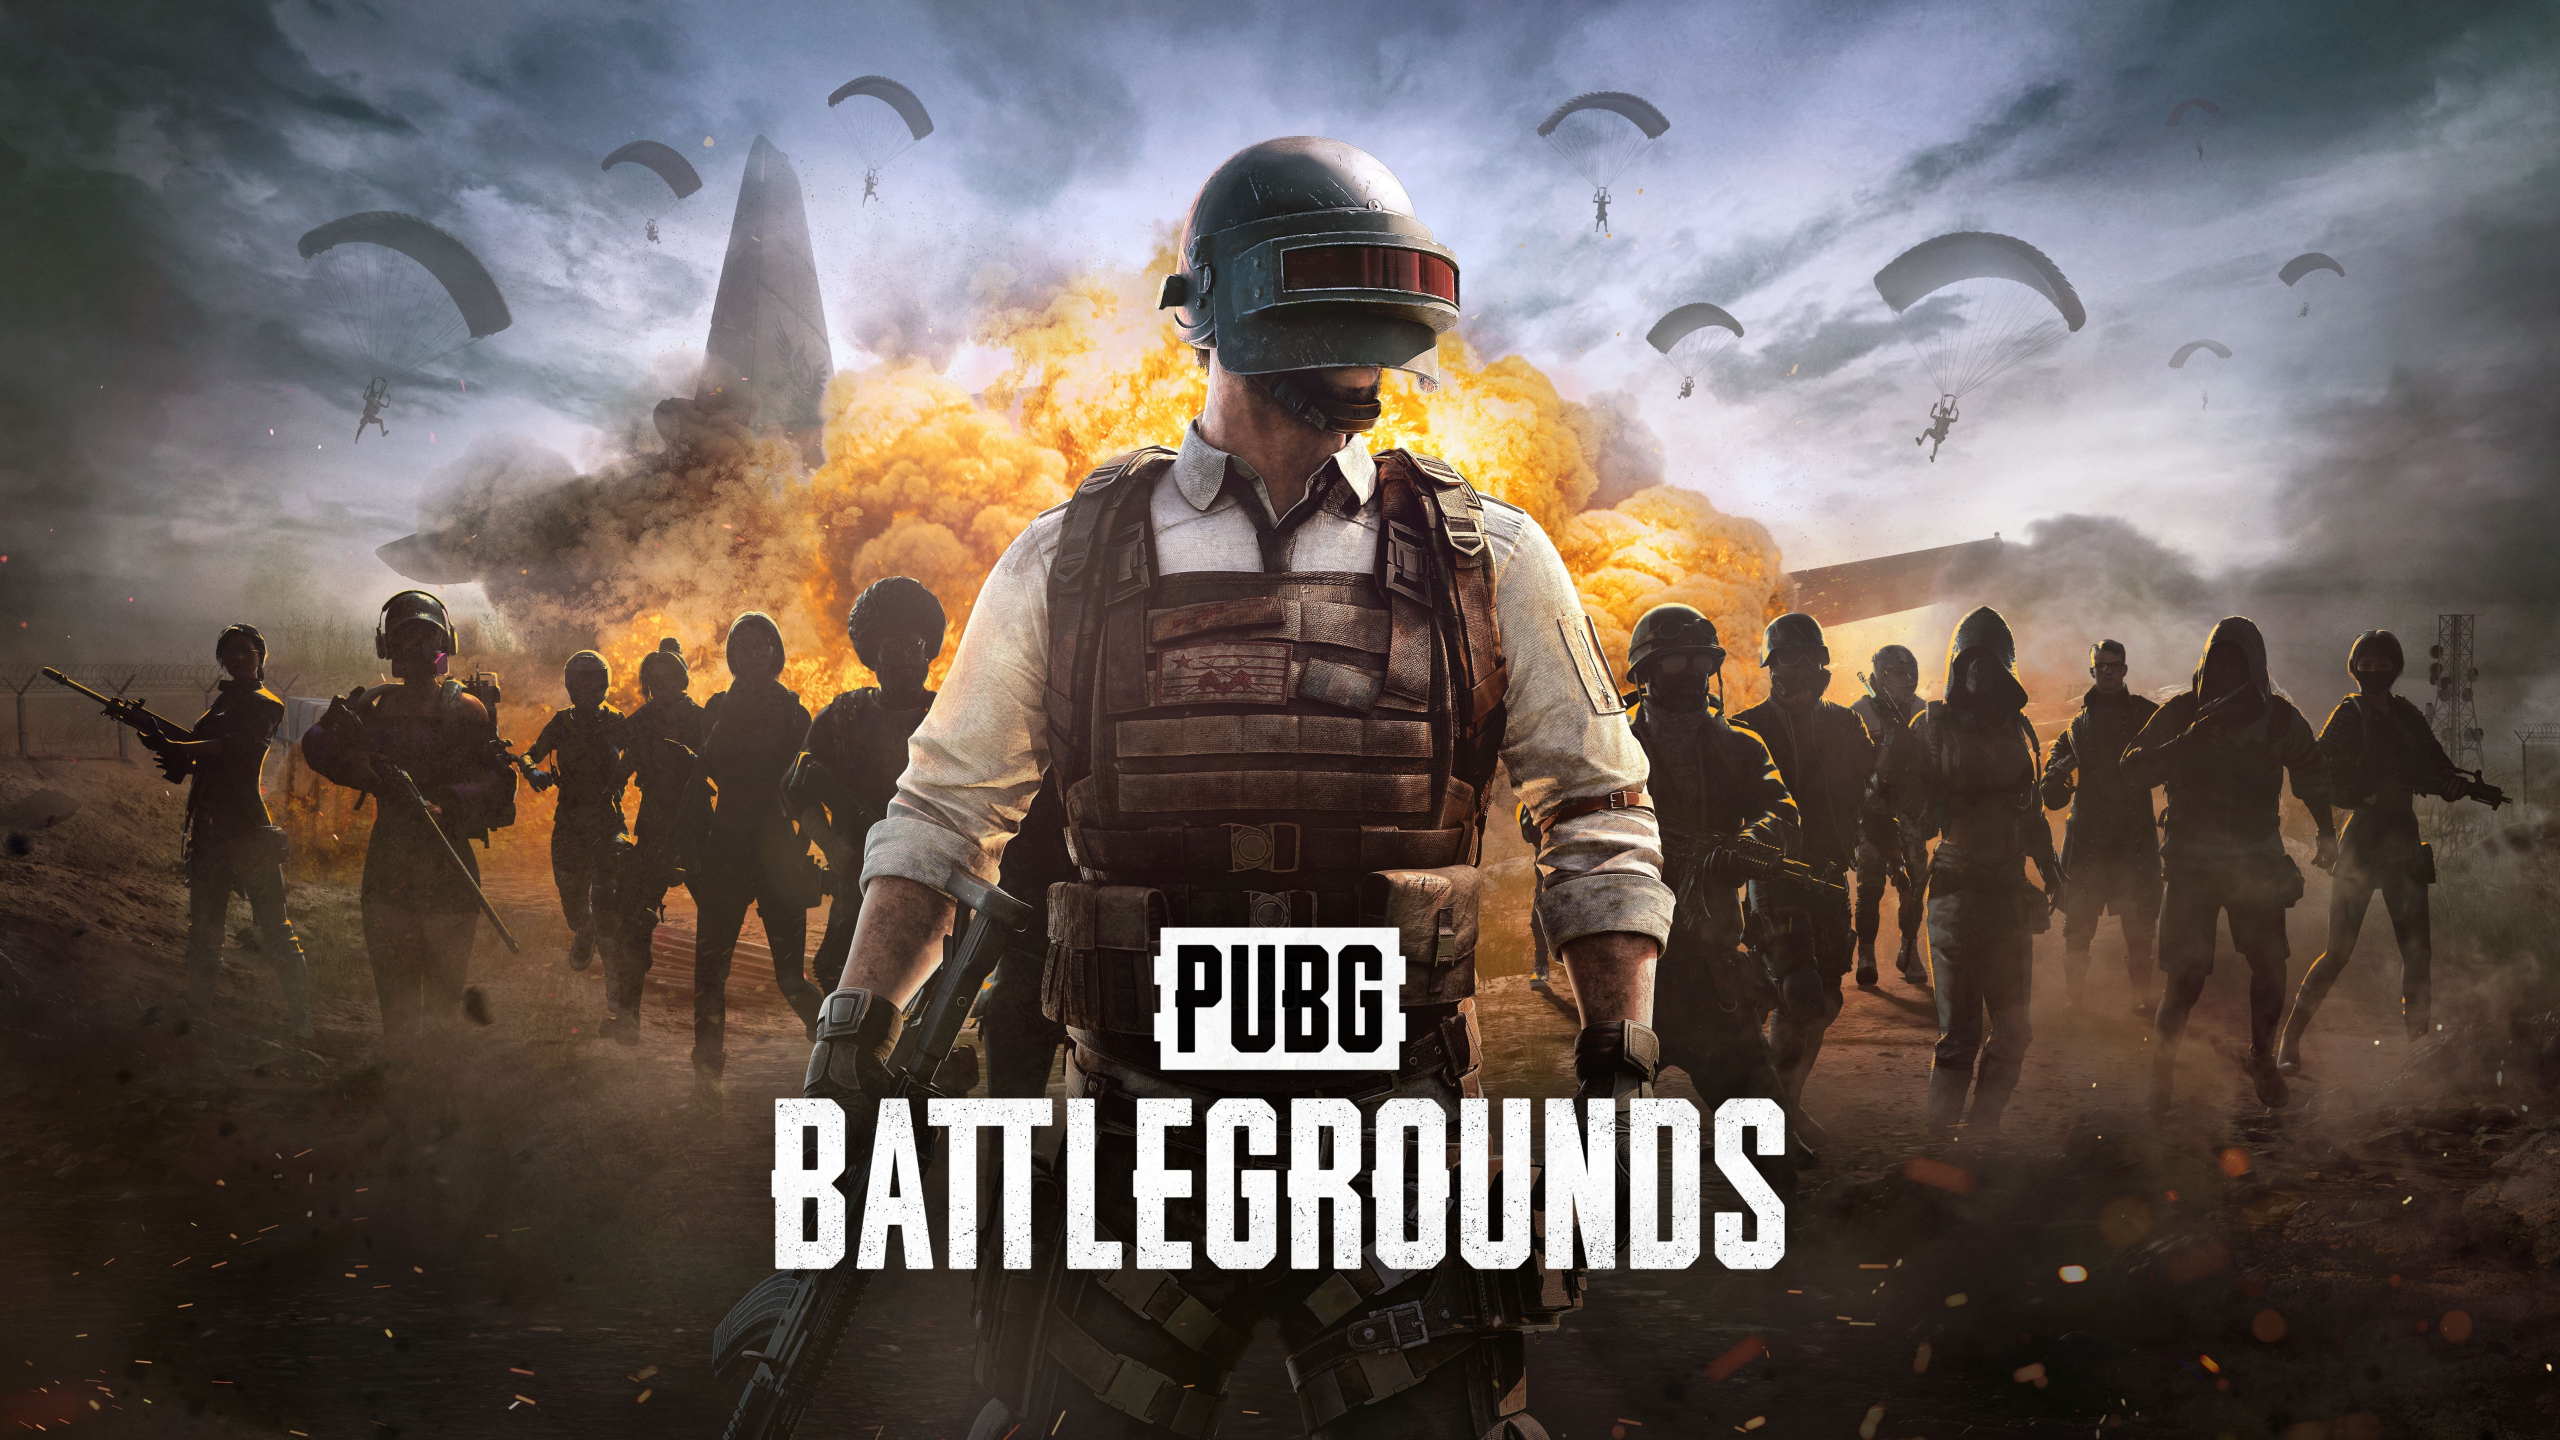 Pubg 4K wallpapers for your desktop or mobile screen free and easy to  download